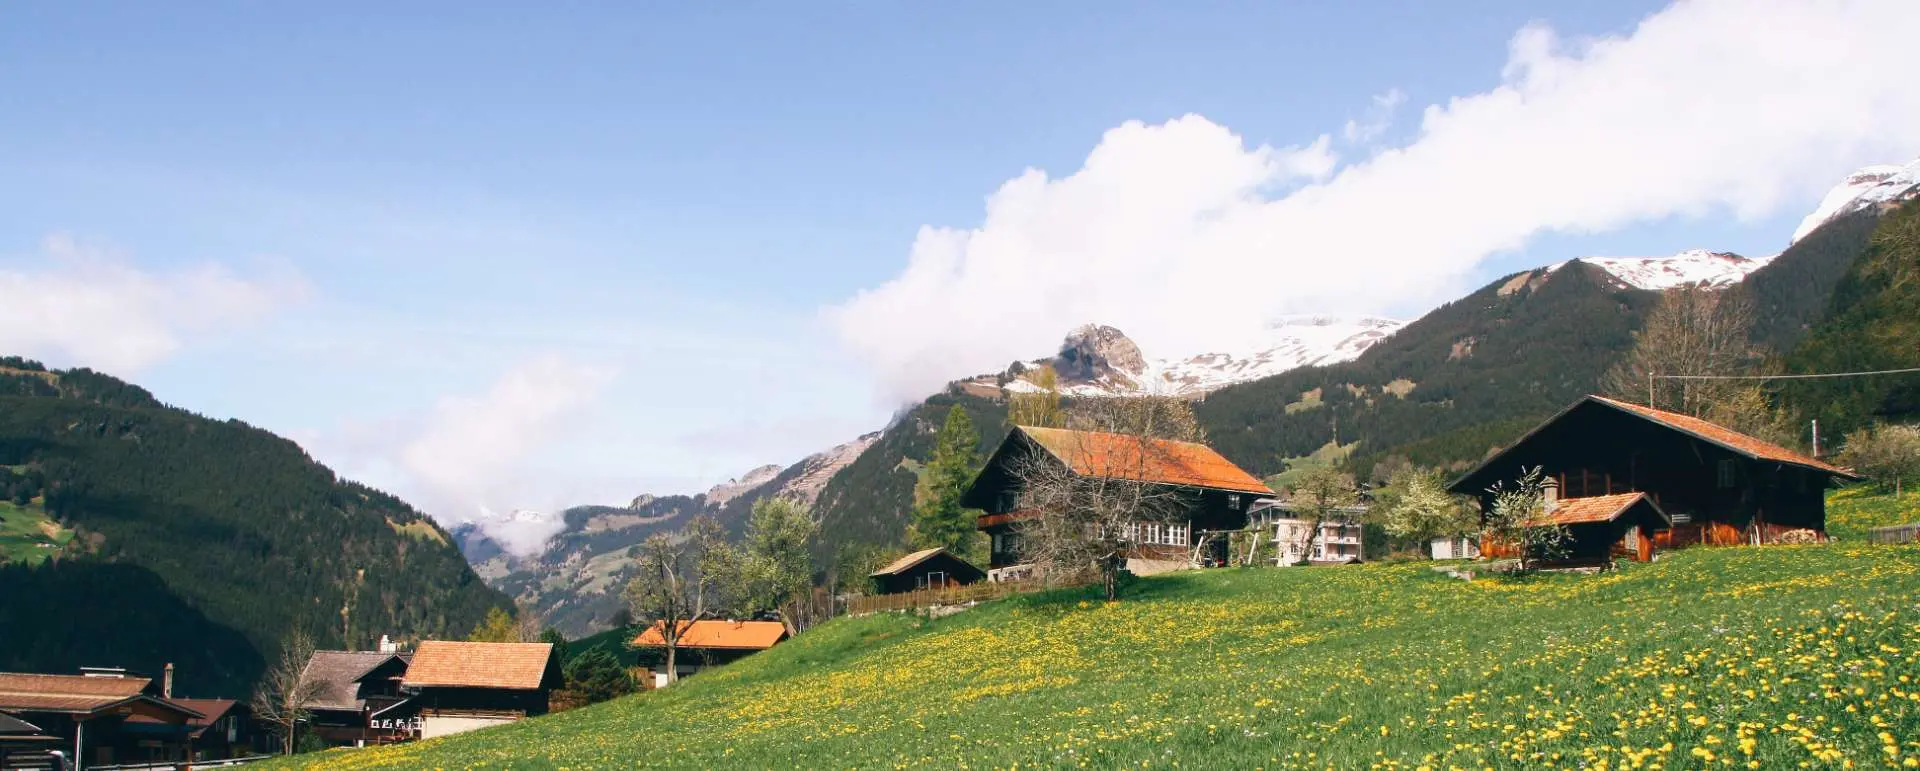 Bernese Highlands - Self-catering group accommodation for travelers